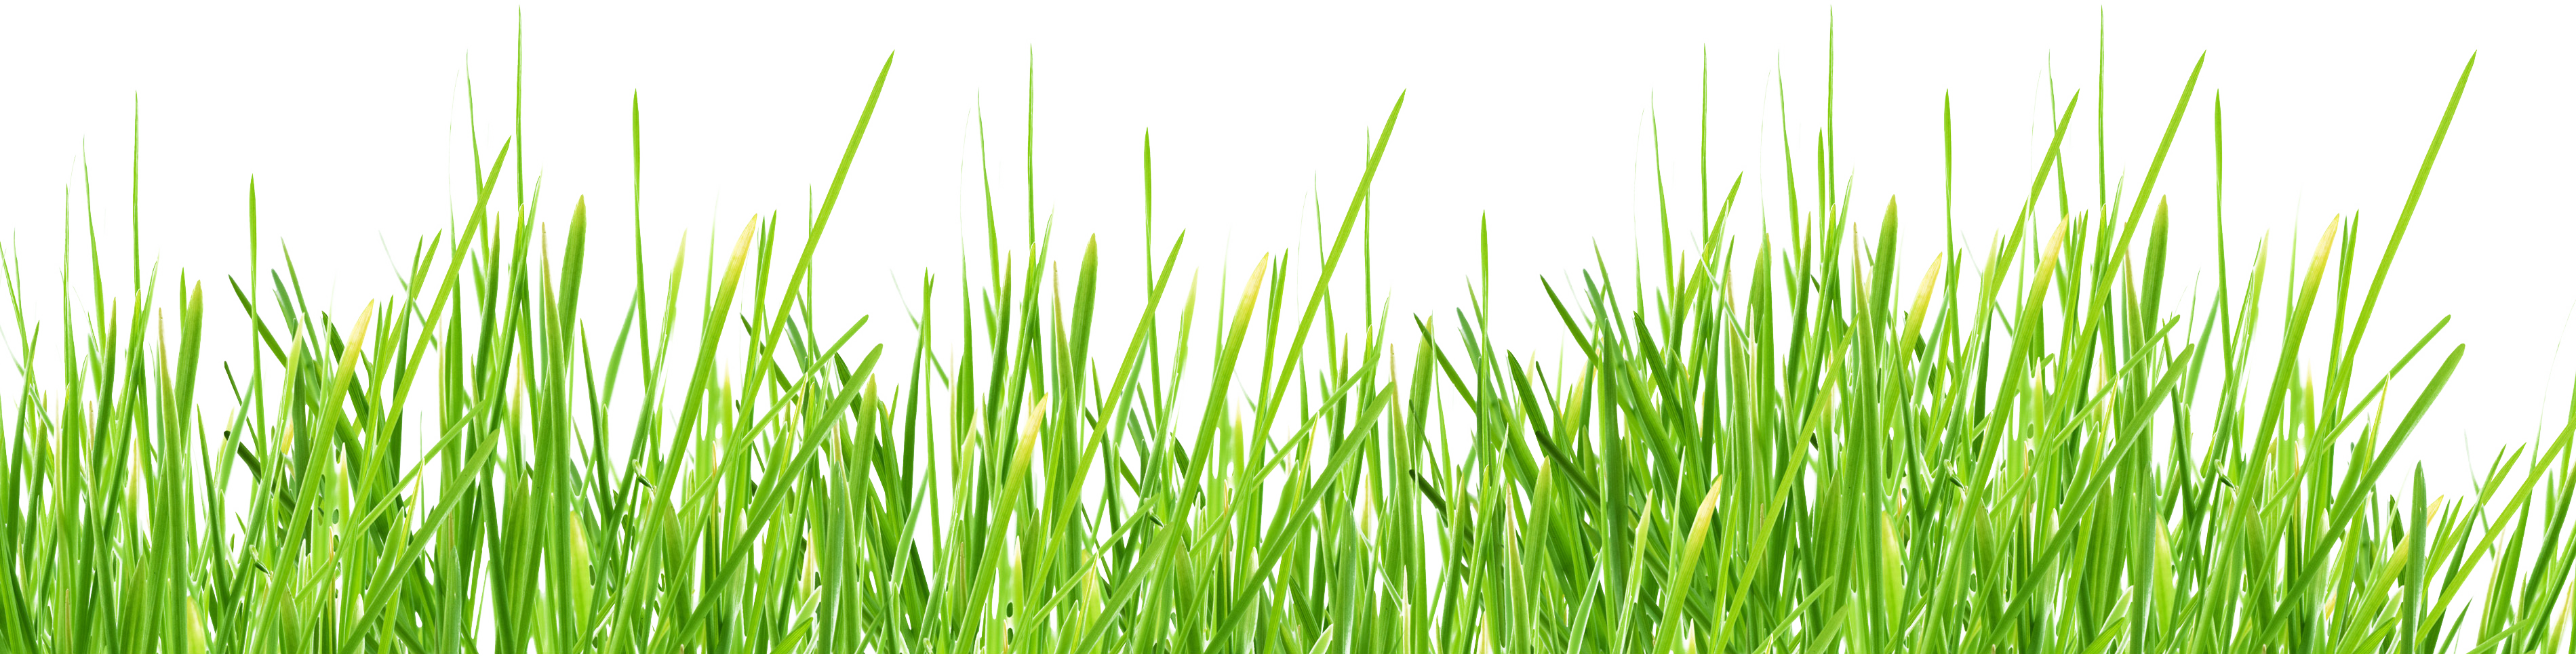 Line Of Grass PNG HD Quality